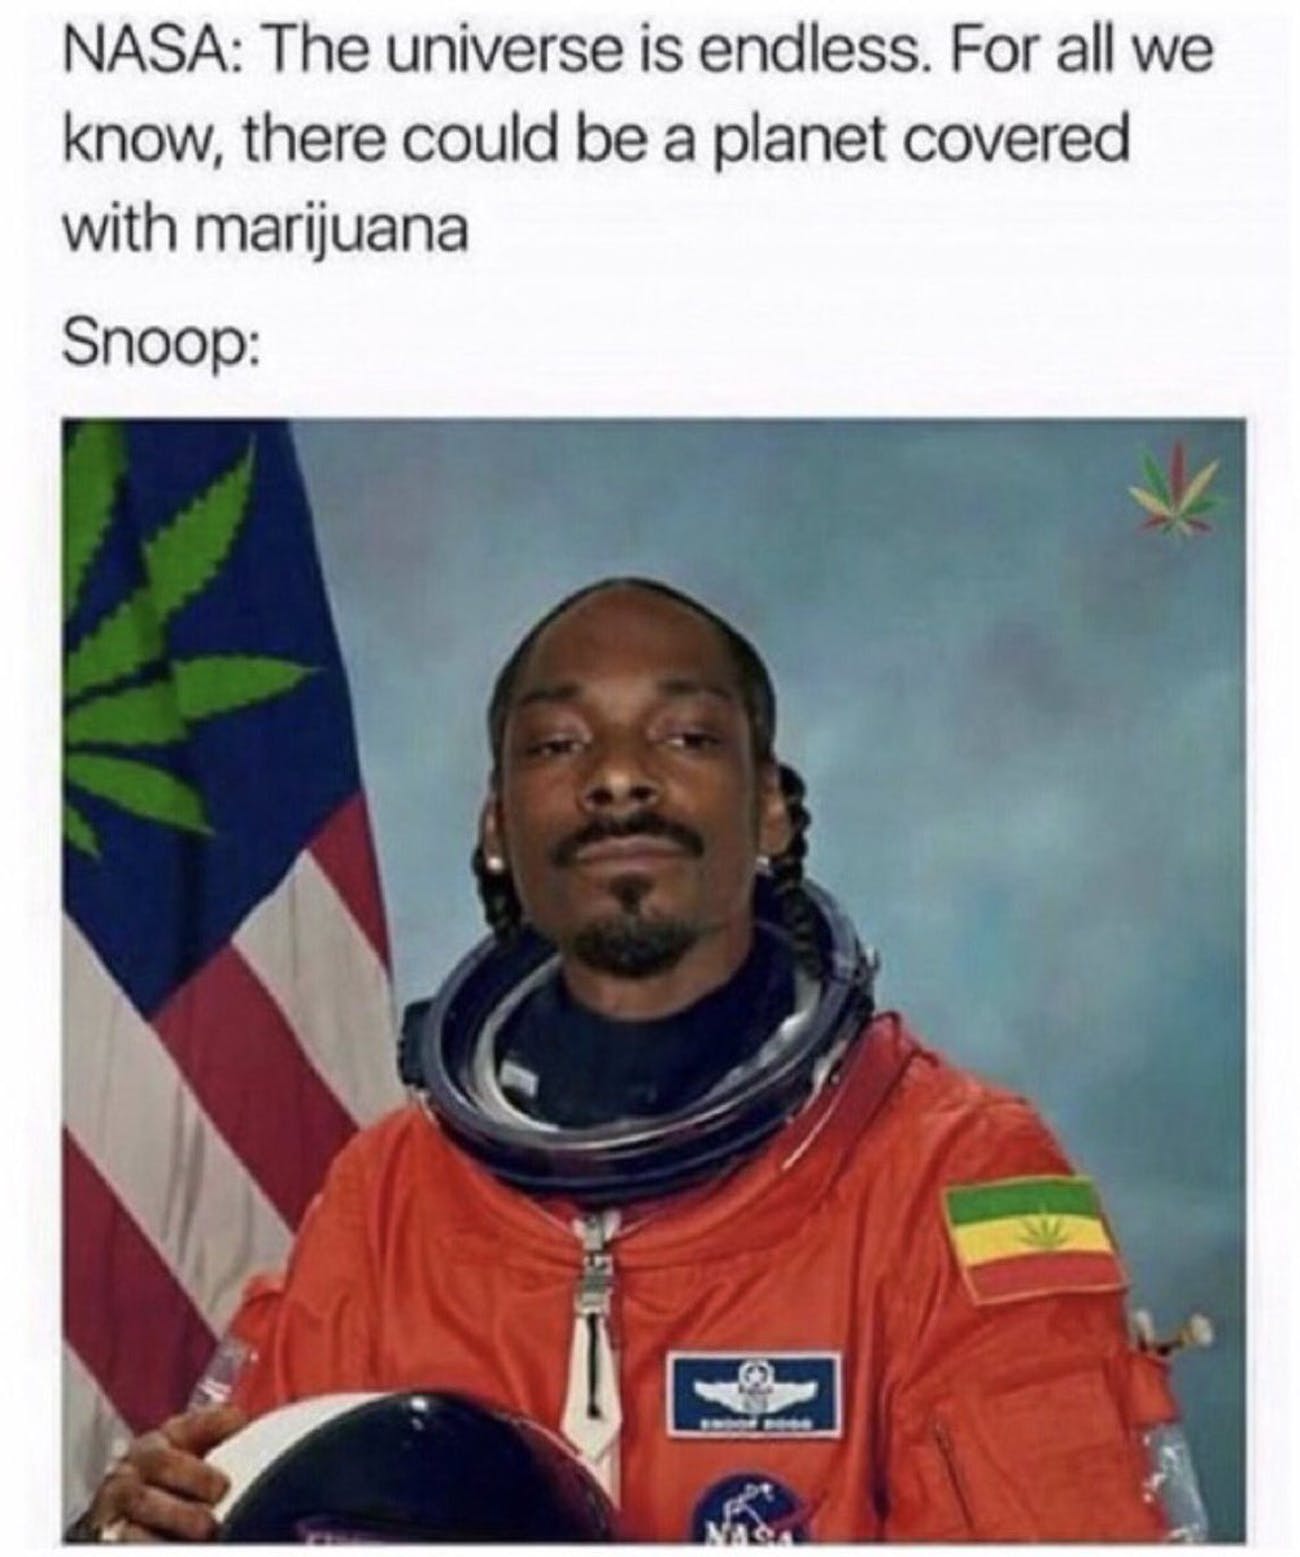 snoop memes - Nasa The universe is endless. For all we know, there could be a planet covered with marijuana Snoop